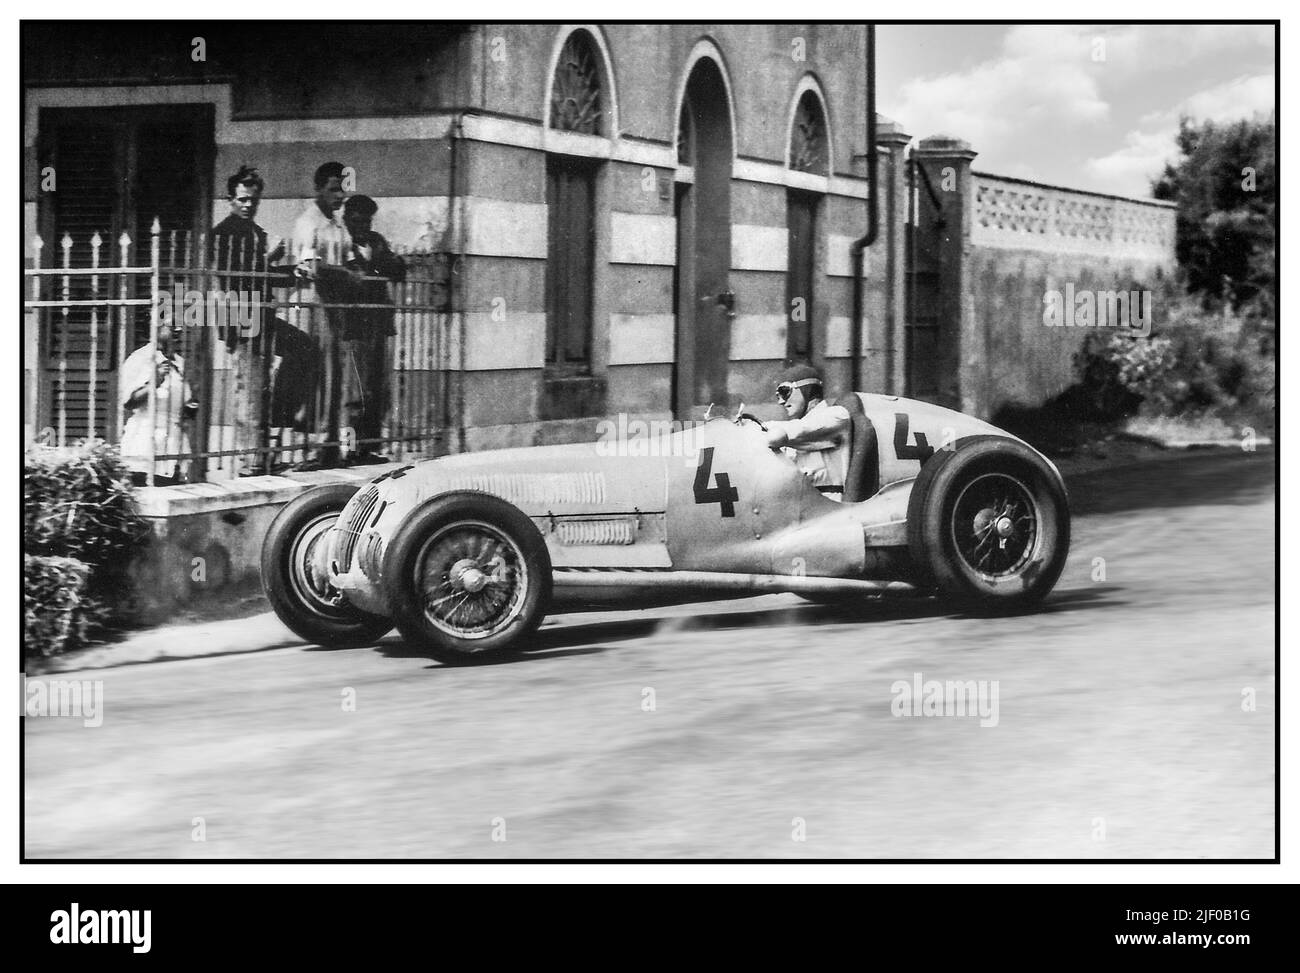 Driver Von Brauchitsch (n ° 4) in a 'Silver Arrow' Mercedes at the Circuit del Montenero.   Manfred Georg Rudolf von Brauchitsch (15 August 1905 – 5 February 2003) was a German auto racing driver who drove for Mercedes-Benz in the famous 'Silver Arrows' of Grand Prix motor racing in the 1930s. Montenero Circuit, official name: Circuito del Montenero or sometimes referred to simply as 'the Livorno Circuit', was a Grand Prix motor racing road course located at the southern outskirts of Livorno, a city on the mediterranean coast of the Tuscany region in Italy. Stock Photo